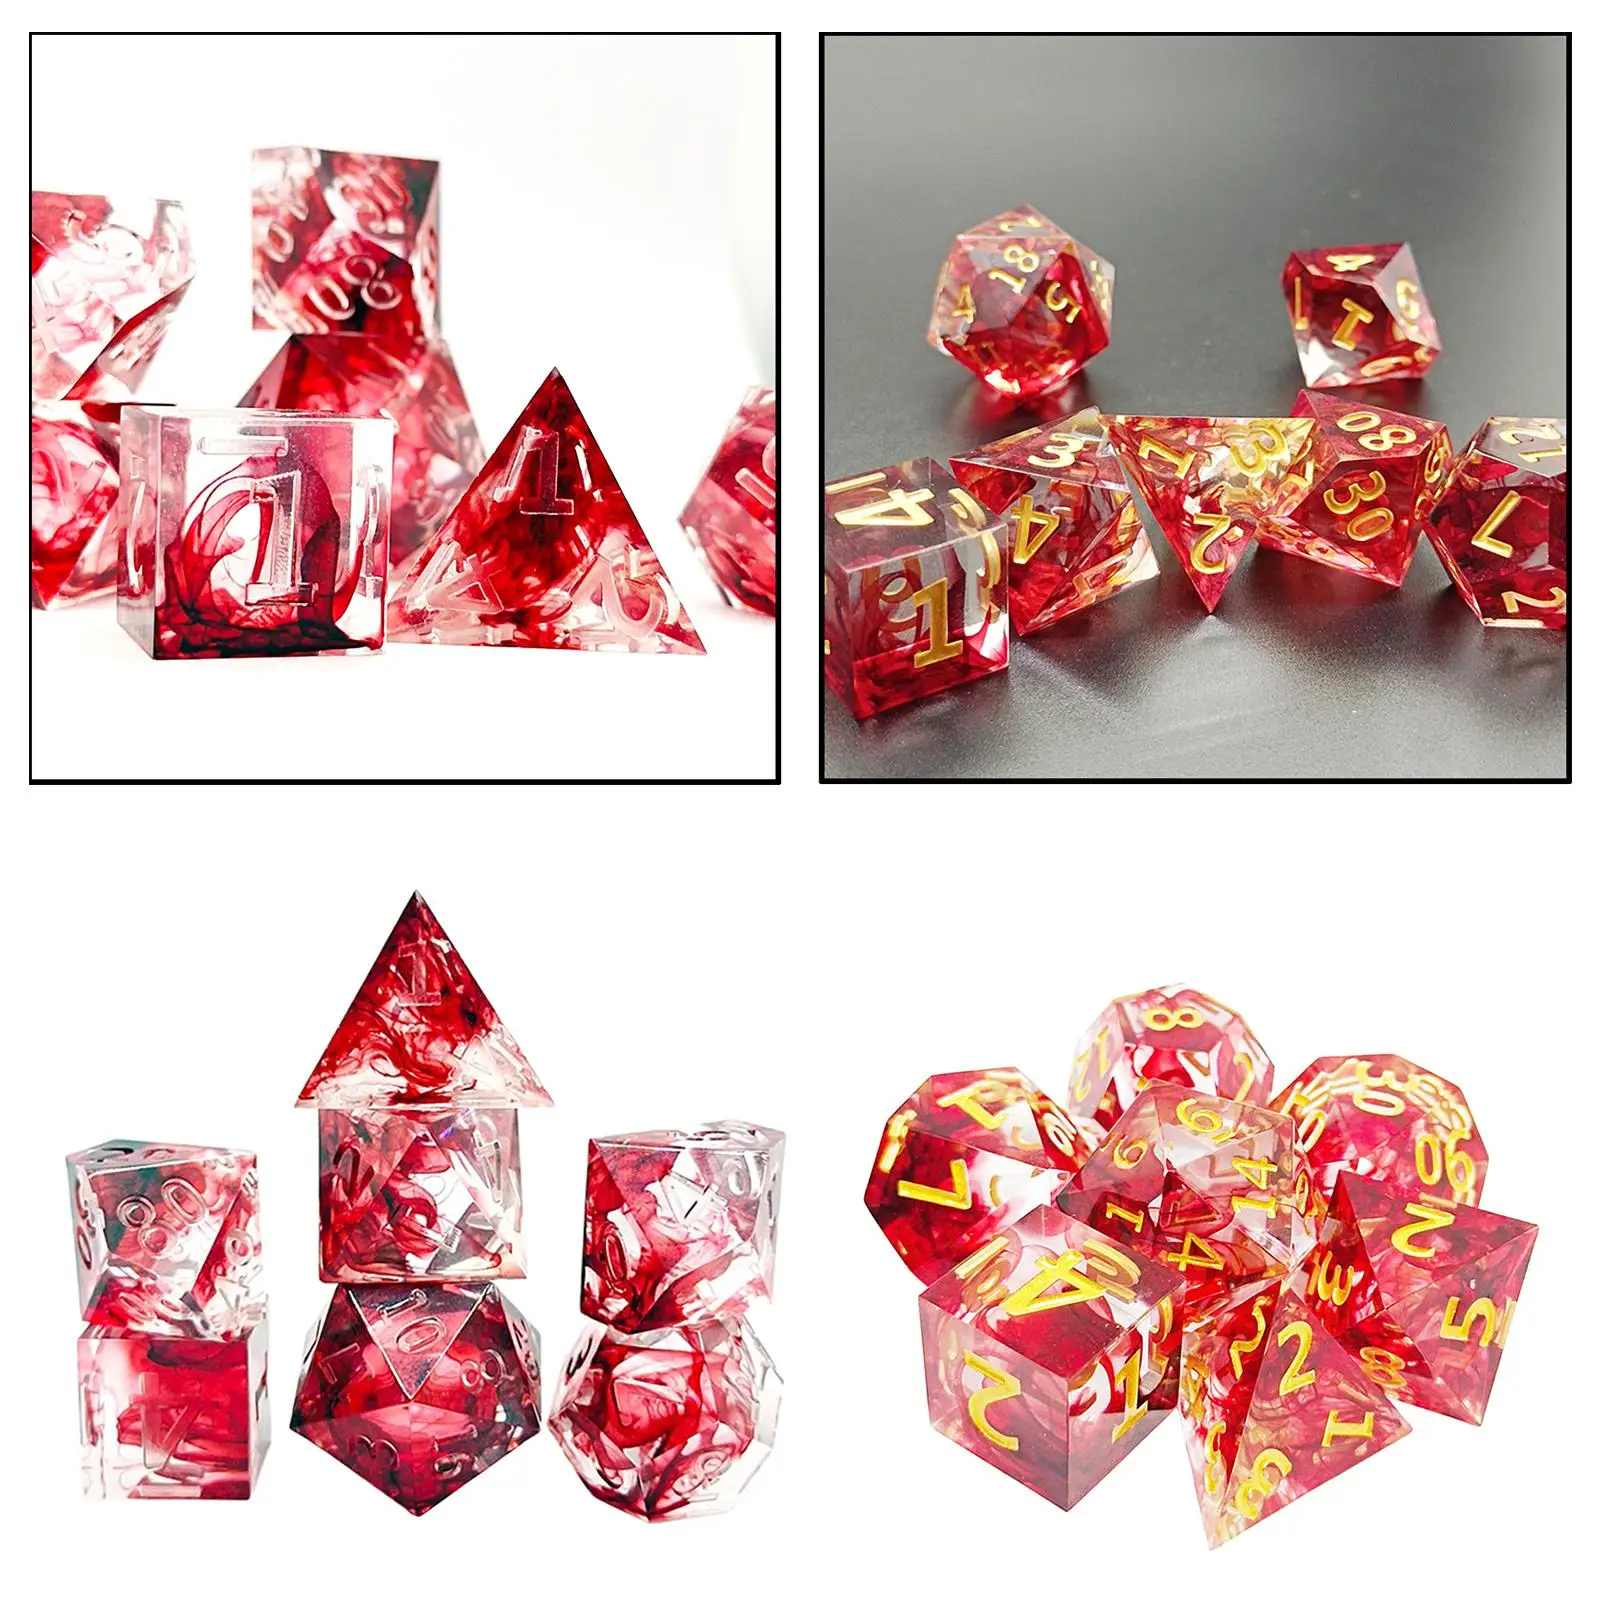 7pcs Blocky Resin Dice Crystal RPG Blood Effect Acute Angle Dice Sets Game Accessories